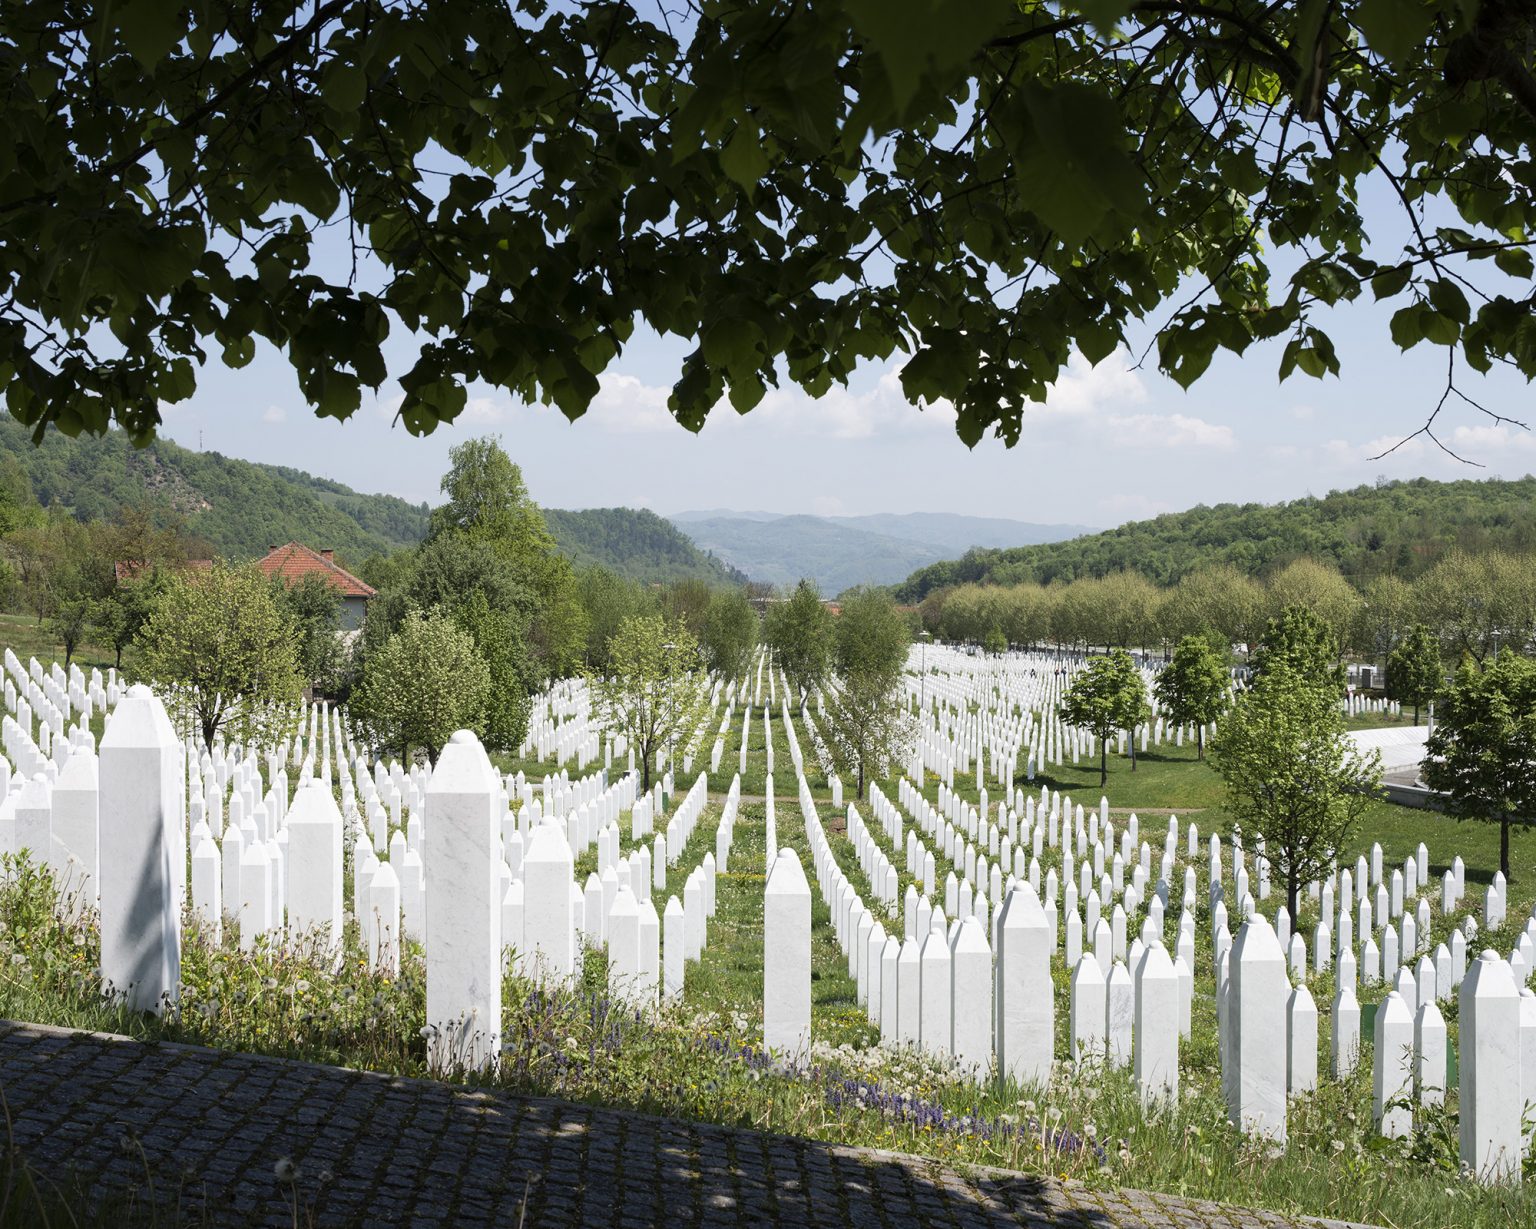 Potocari (Srebrenica), Bosnia Herzegovina, 2019.
The burial site containing the remains of the people killed in July 1995 during the fall of the Srebrenica Safe Area. More than 7.000 persons are buried here.